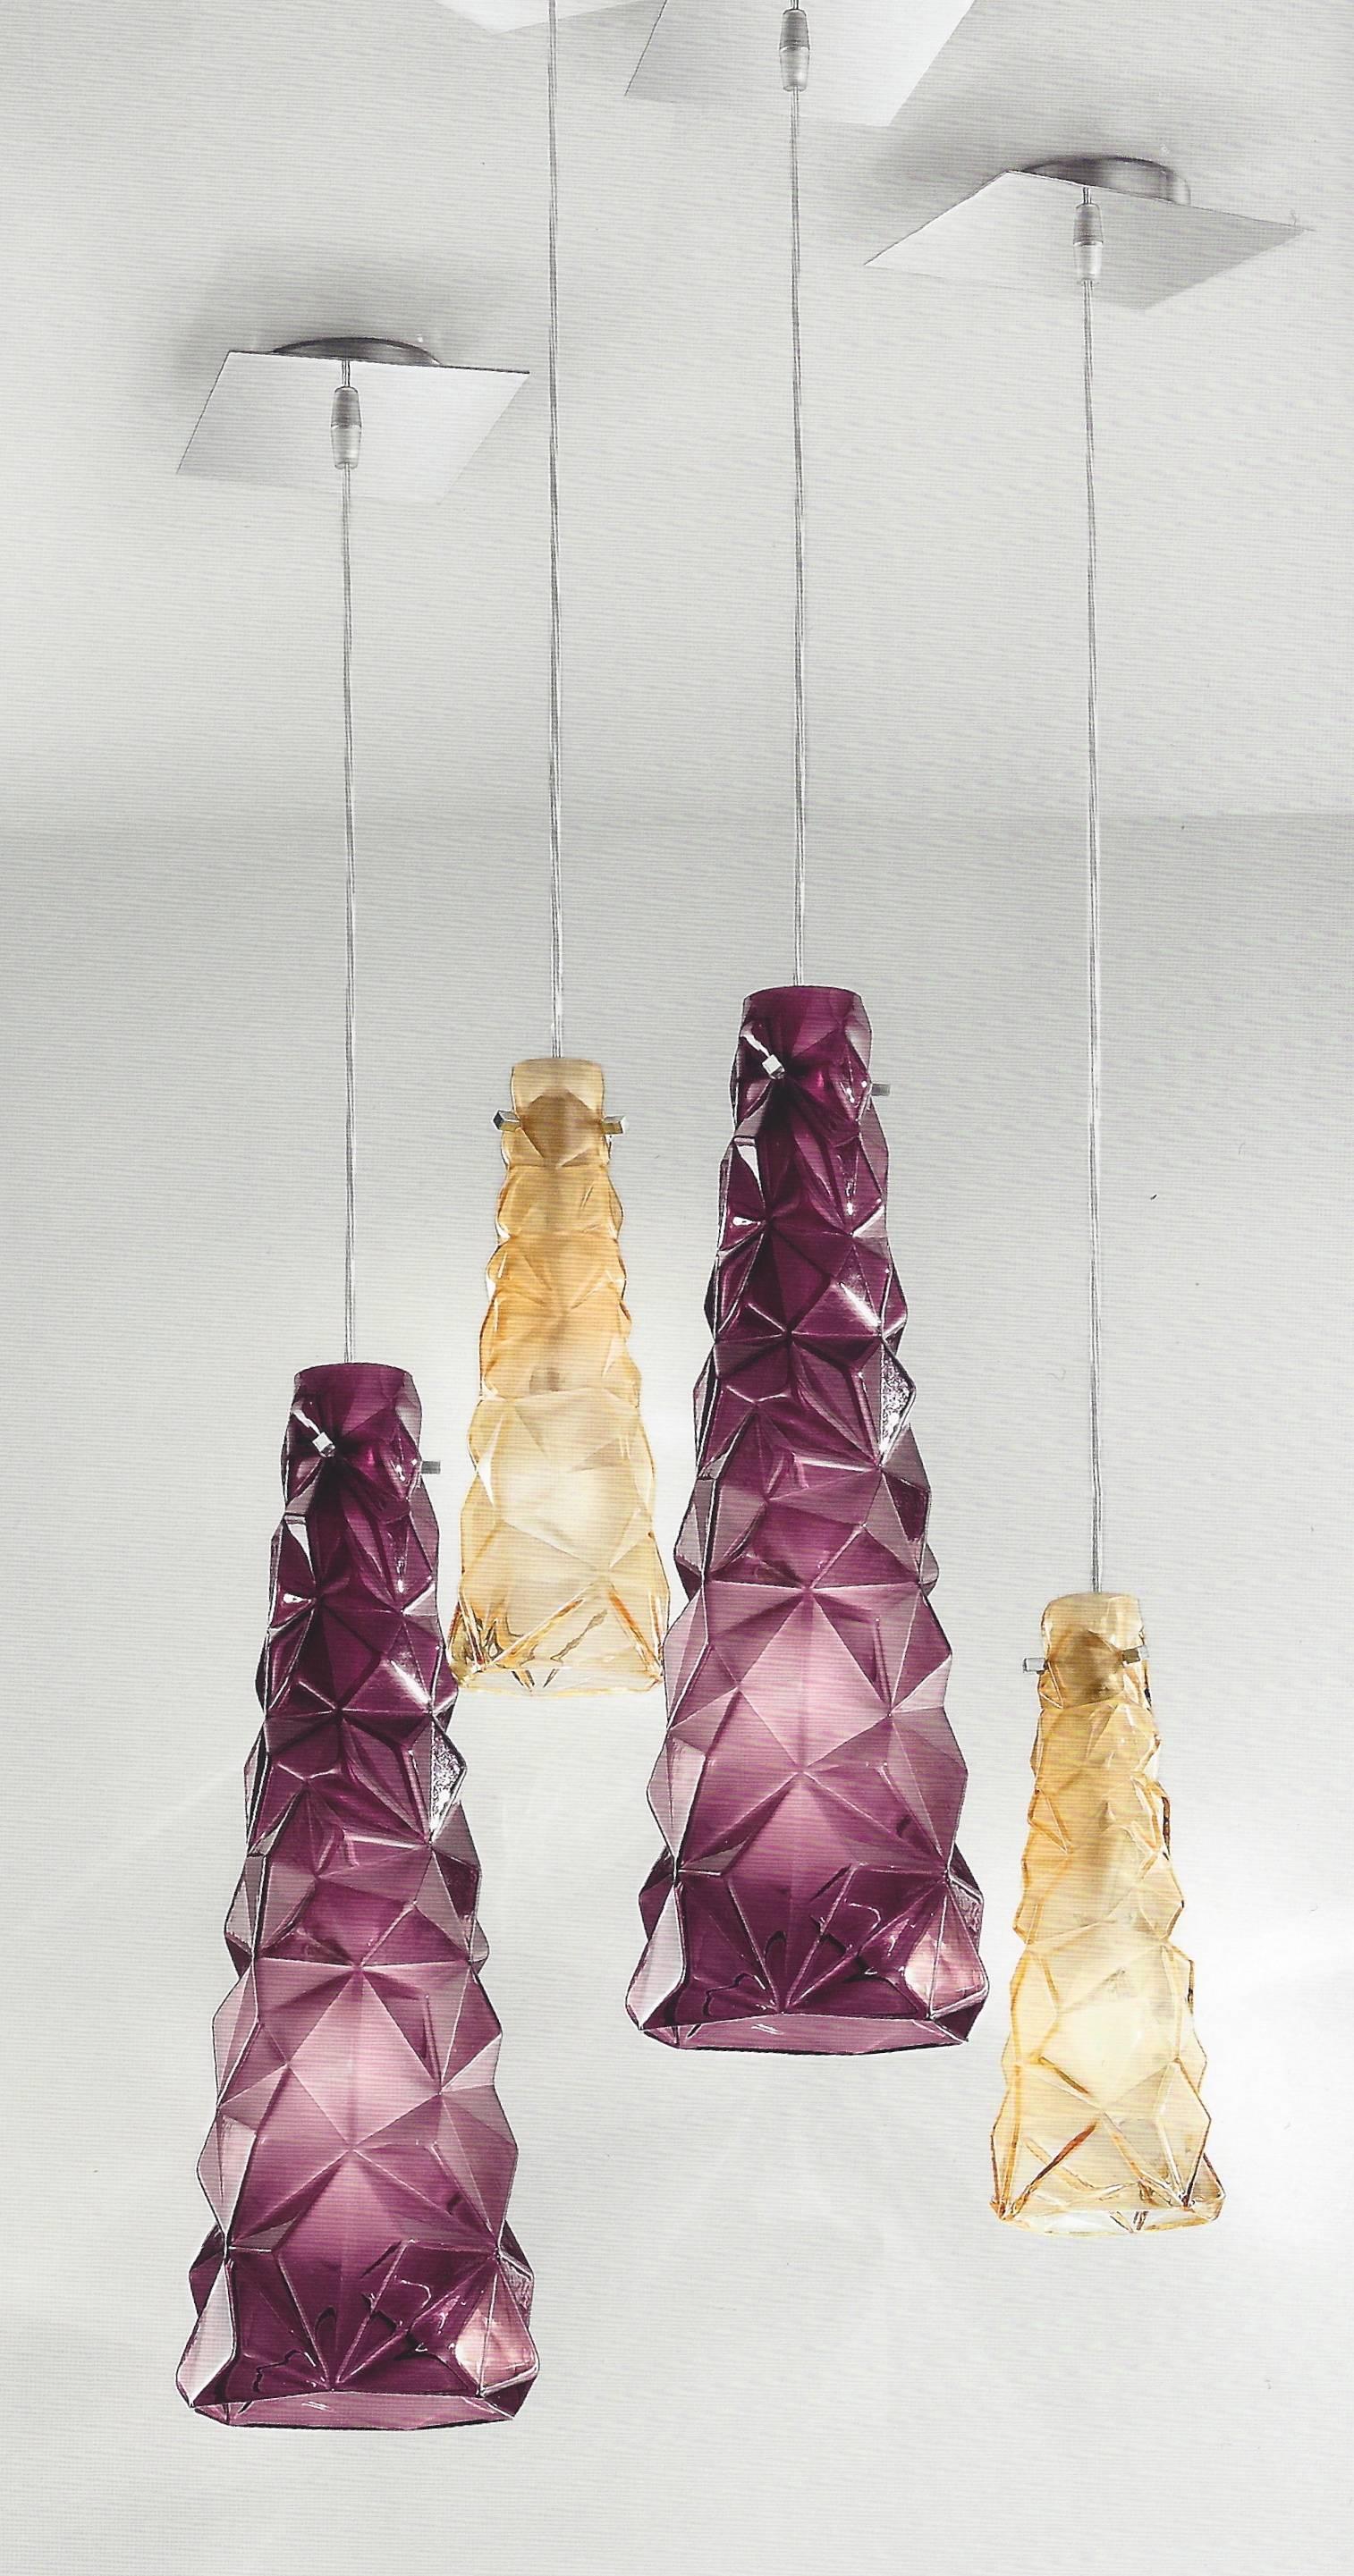 Attractive organic modern pendant lights of trumpet conical shape, hand made in Italy, ideal for a kitchen island, in purple and amber yellow mouth blown Murano glass frosted in the interior to add texture, high quality of the individual handcrafted